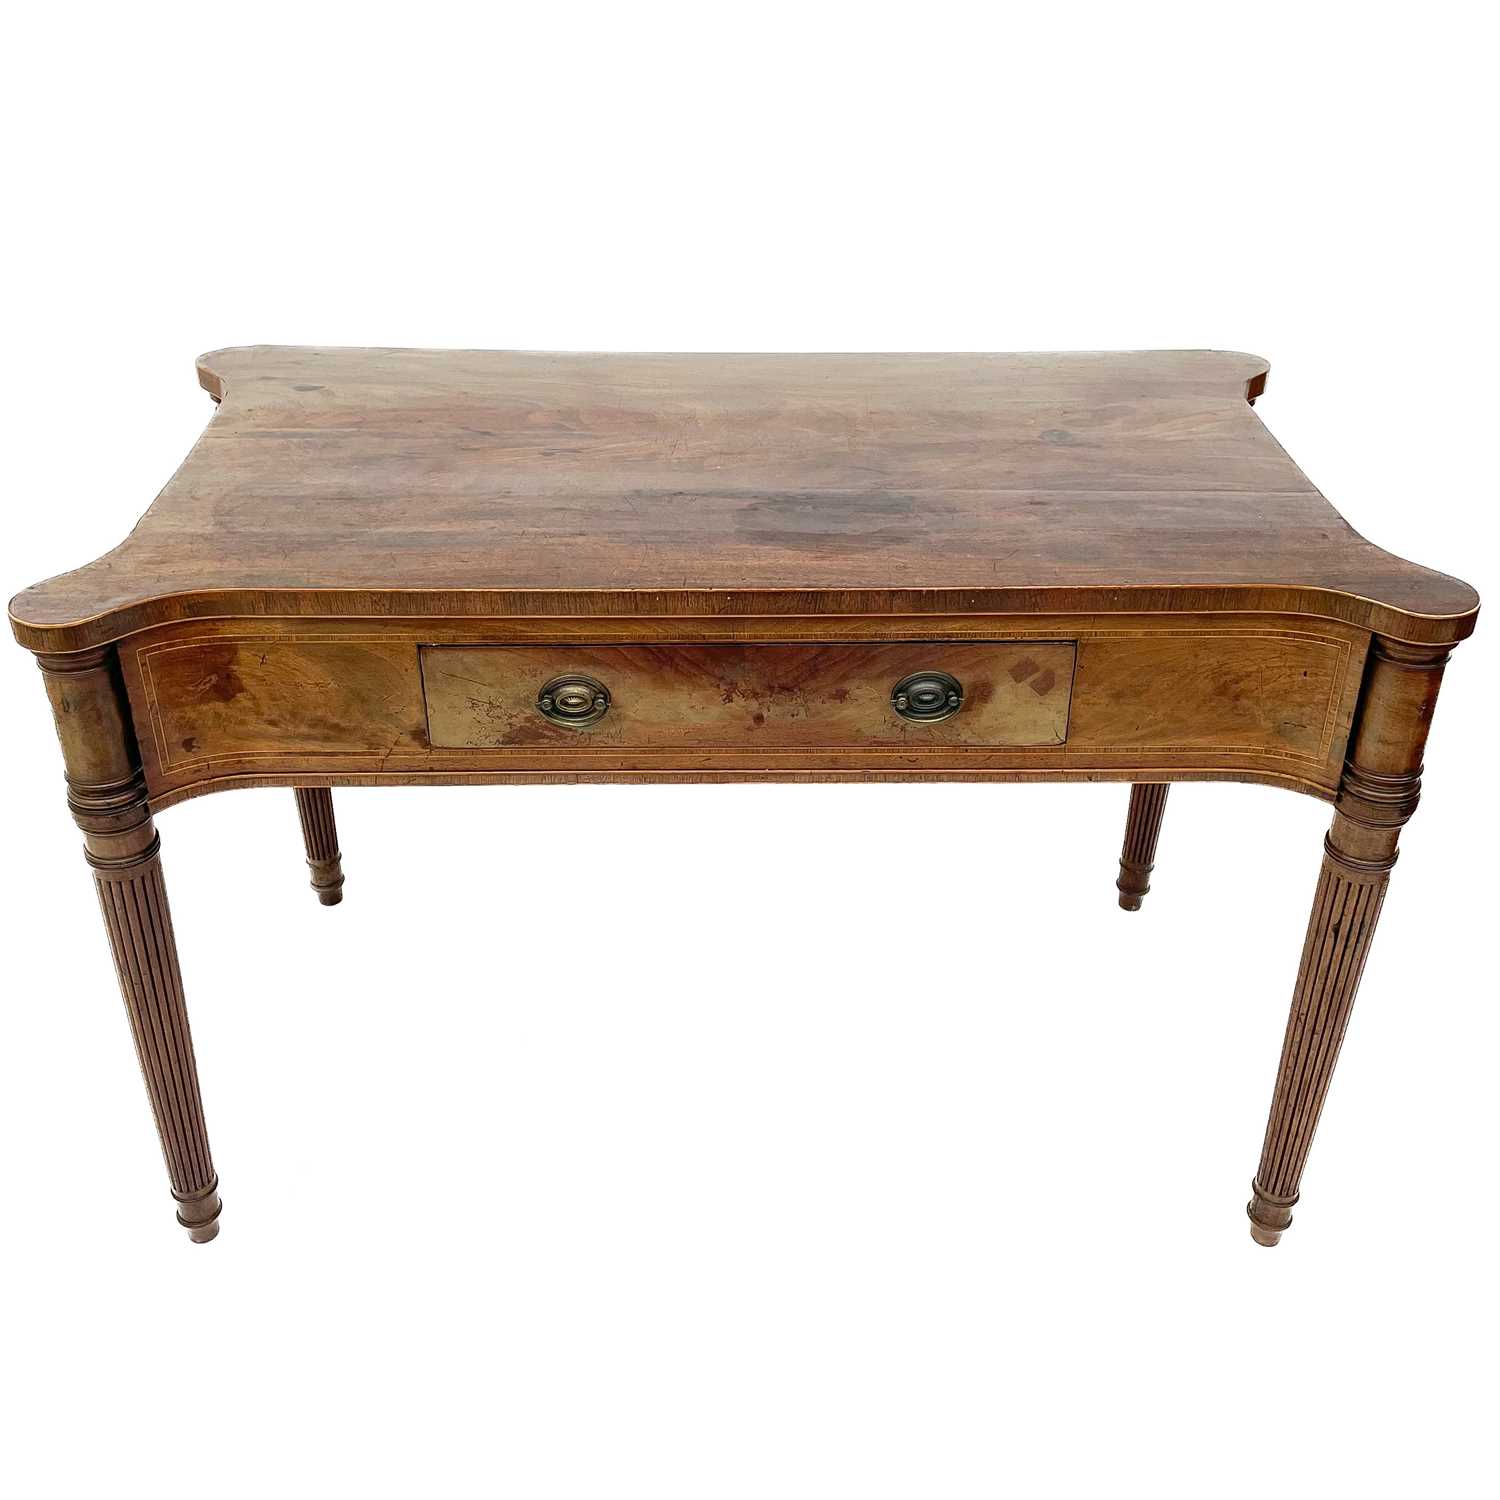 A George III mahogany and inlaid side table, possibly Irish. - Image 8 of 9